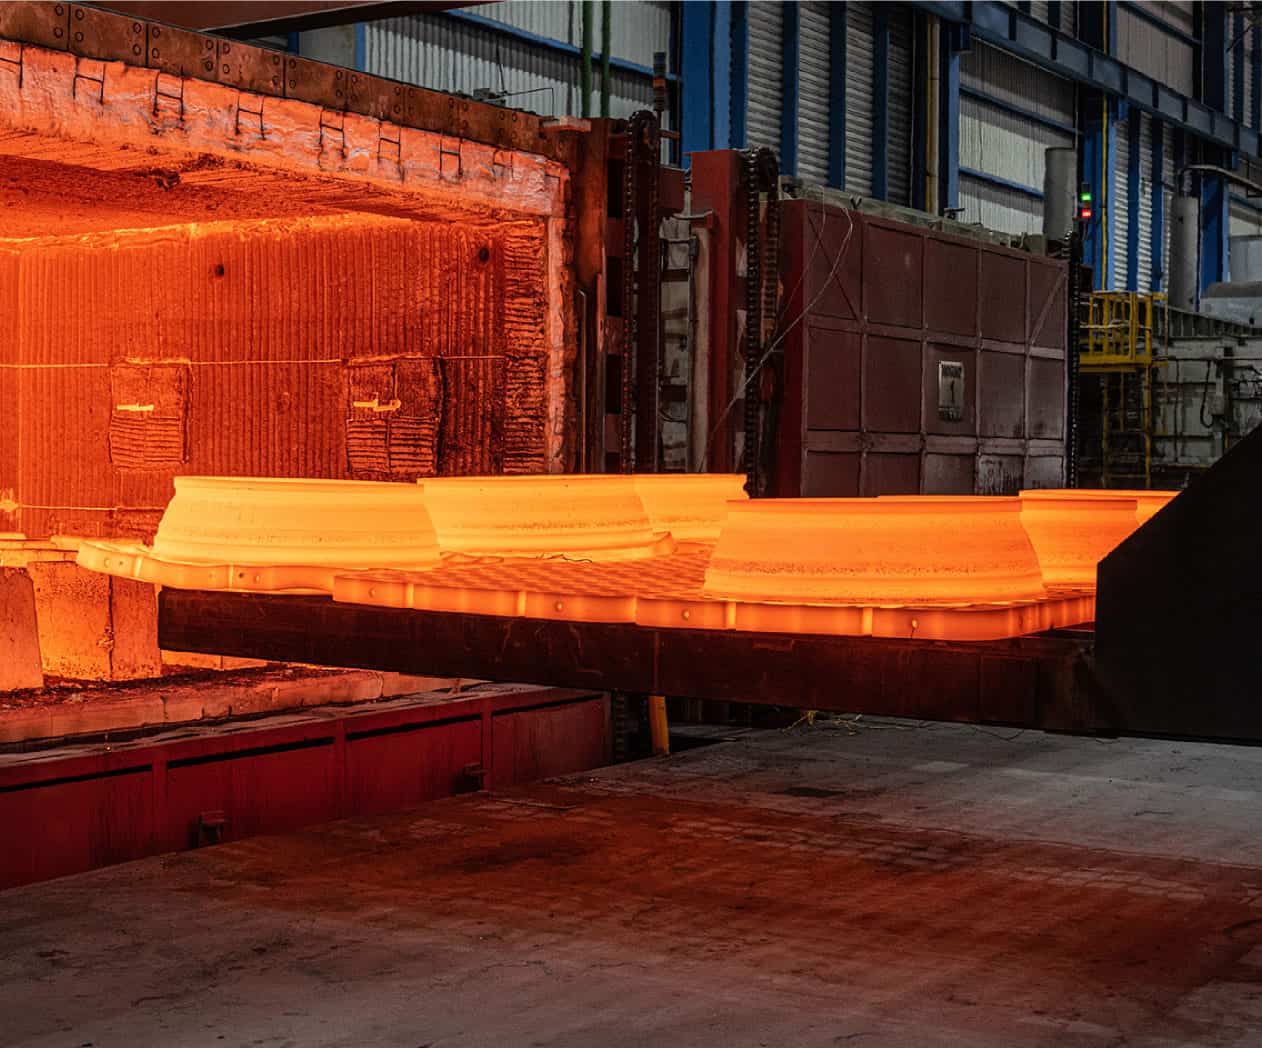 Glowing hot metal slabs being processed in an industrial furnace at a steel mill.